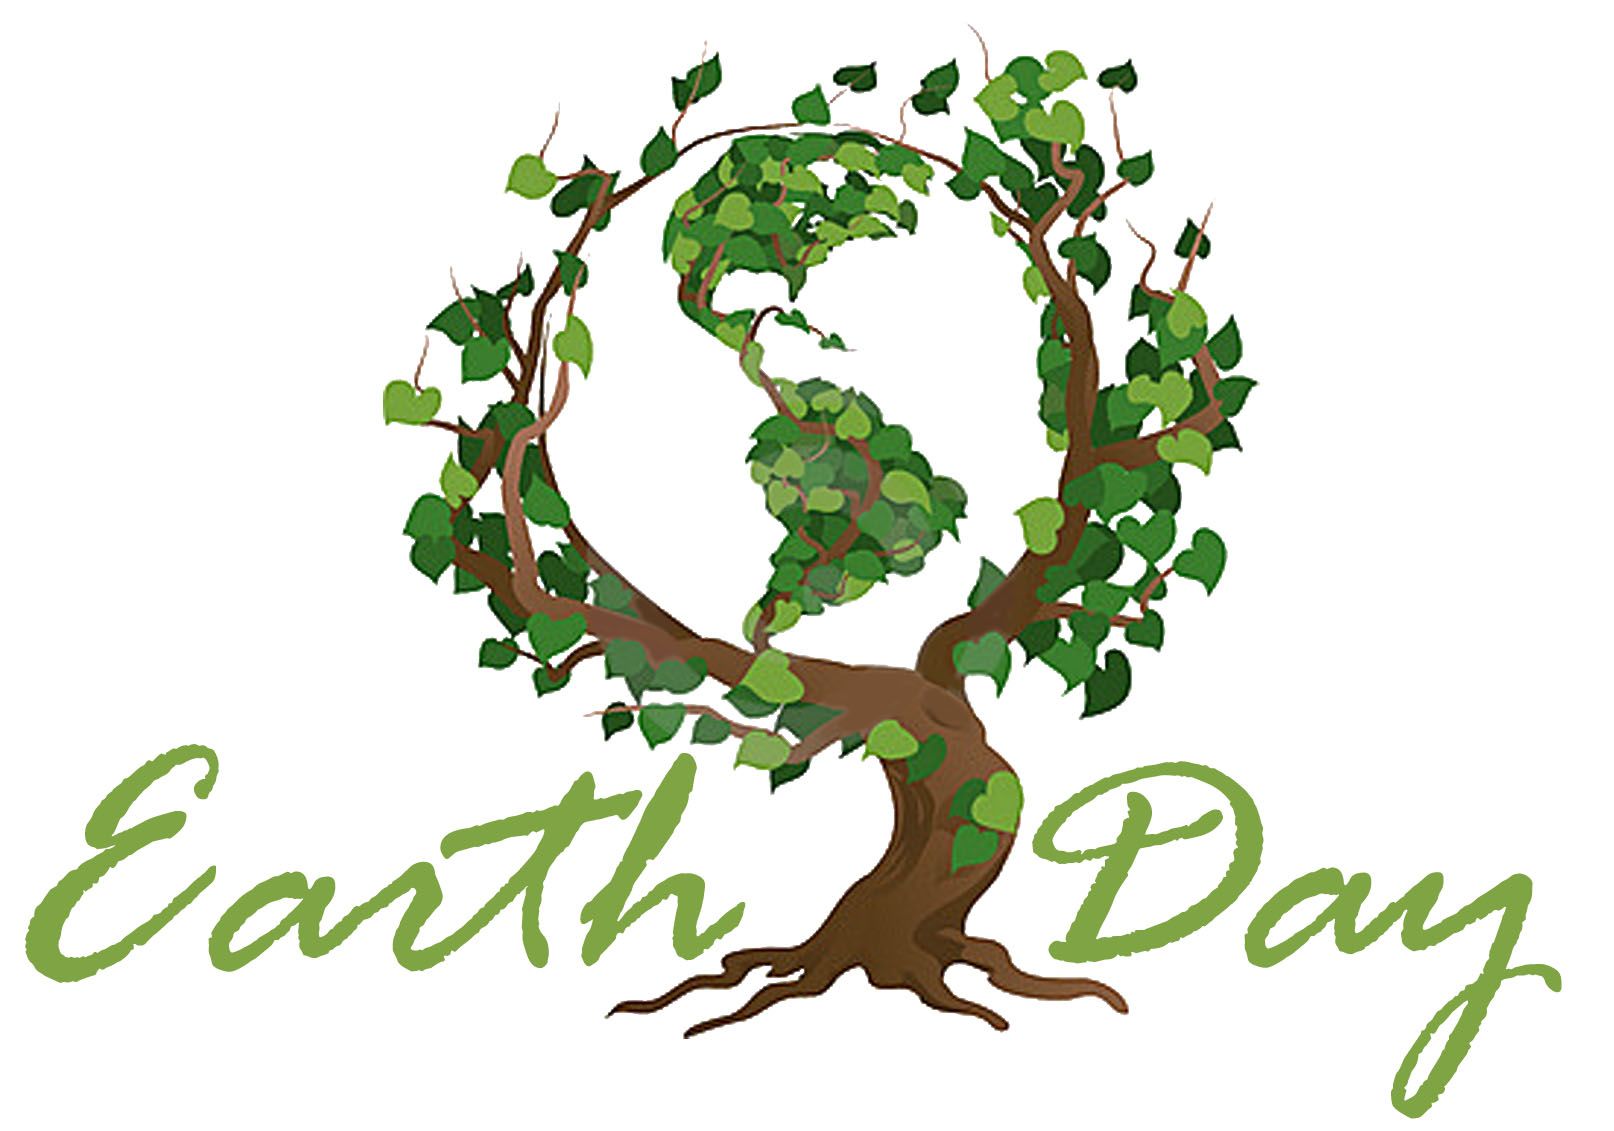 Happy Earth Day 2019 Wishes Quotes Messages Slogans Whatsapp Status Dp Image Pics